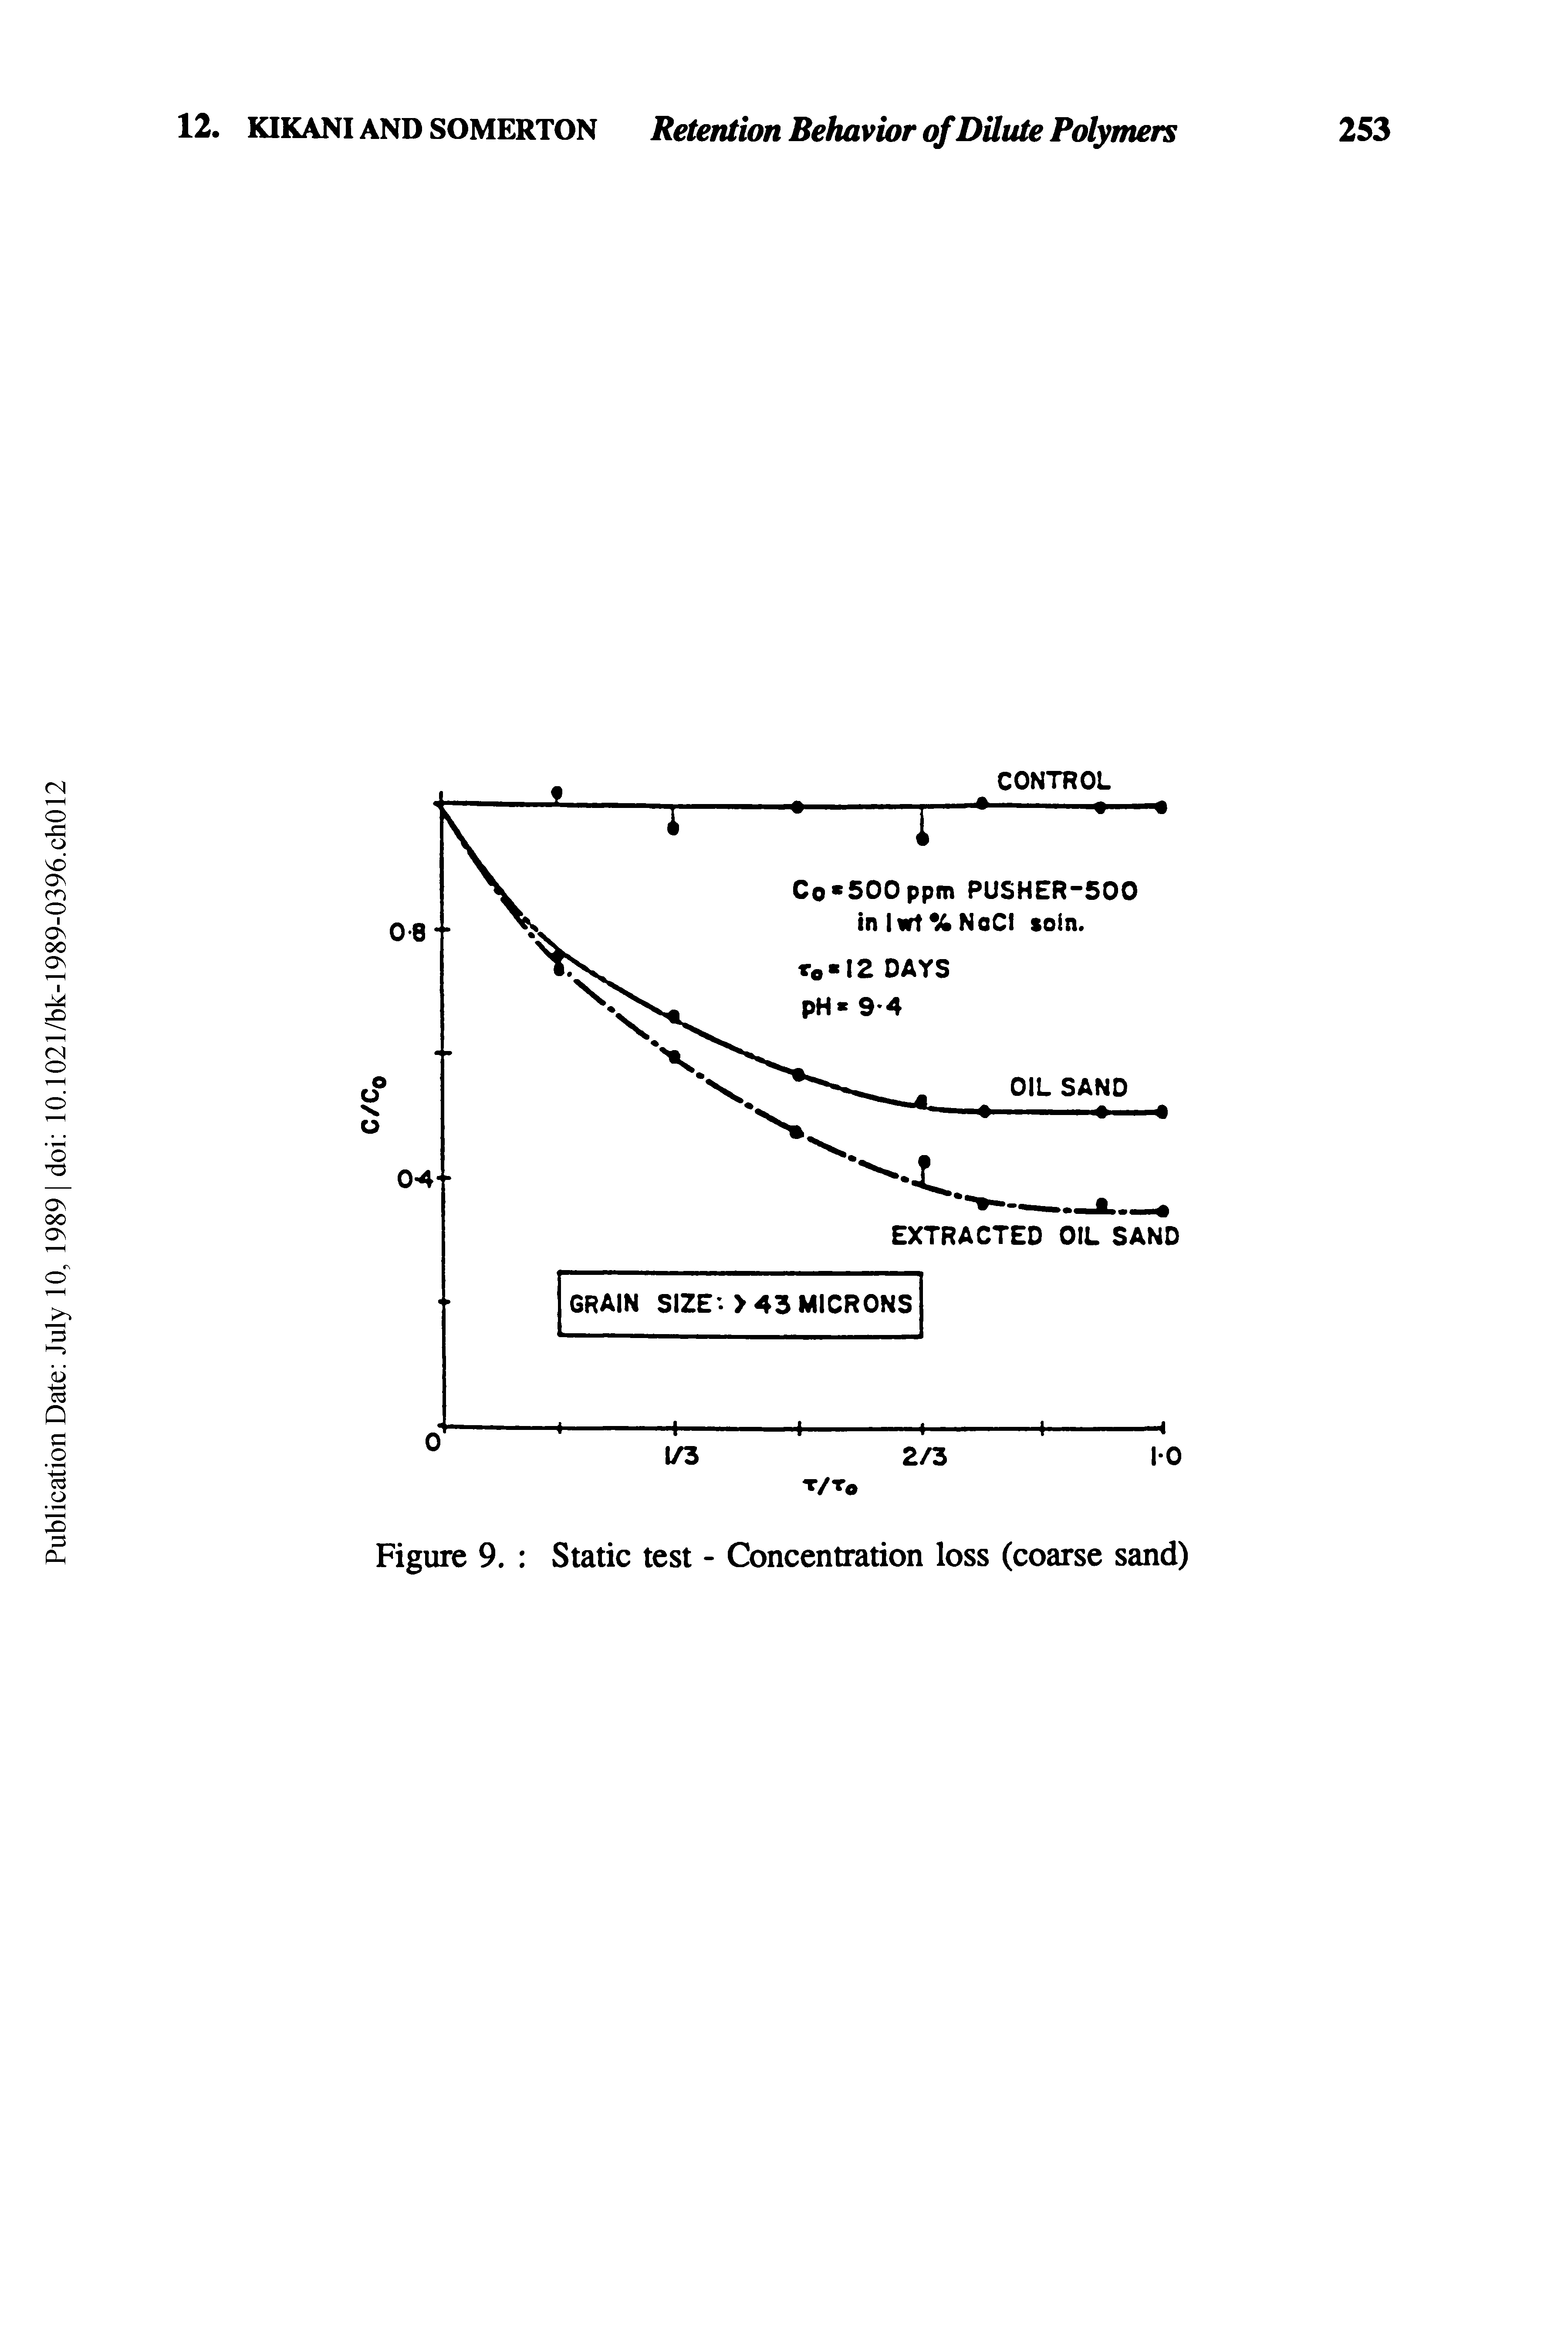 Figure 9. Static test - Concentration loss (coarse sand)...